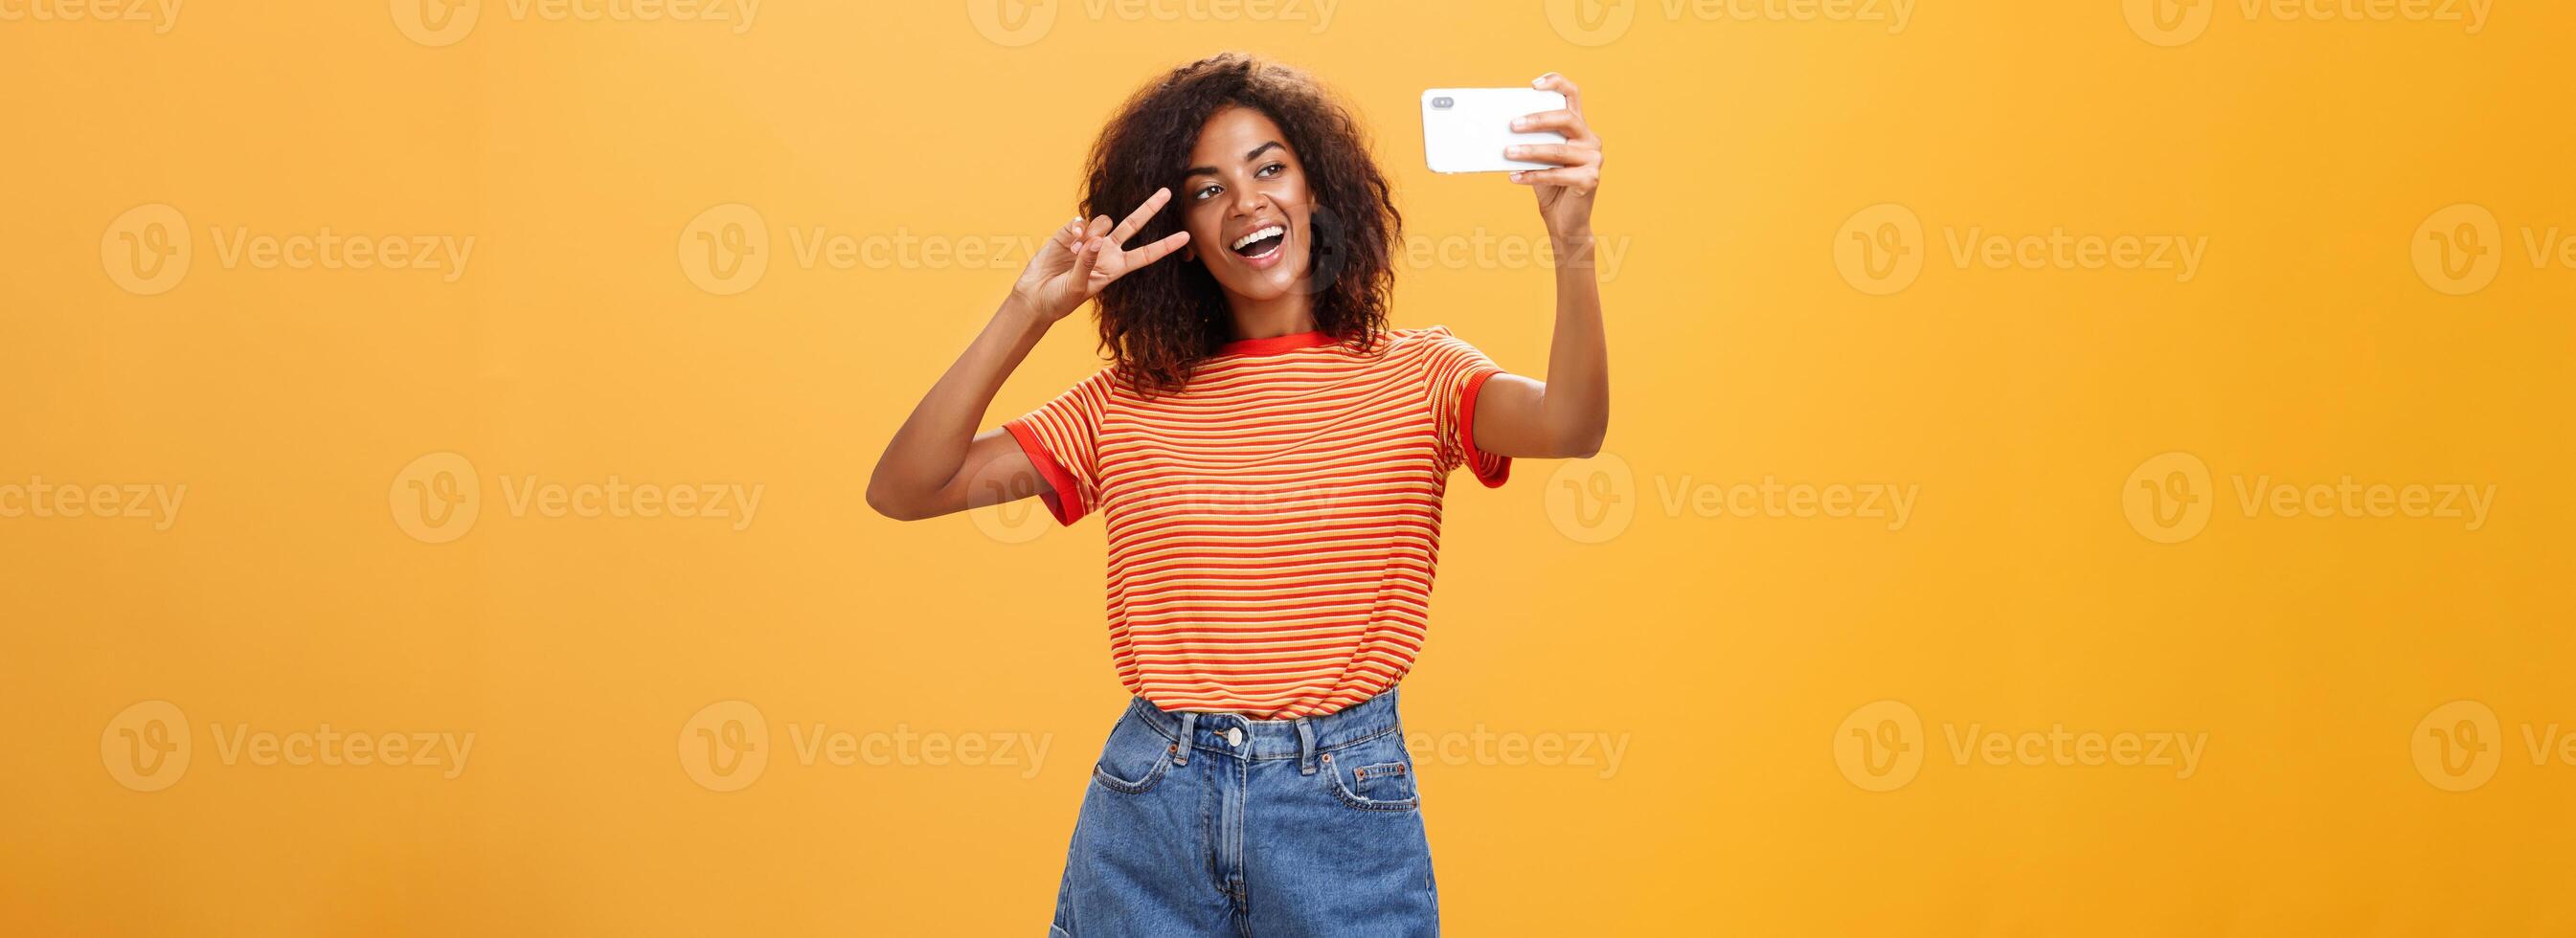 Girl making video vlog with brand new smartphone posting in internet trying become famous standing over orange background posing for selfie gazing at gadget screen showing peace or victory gesture photo